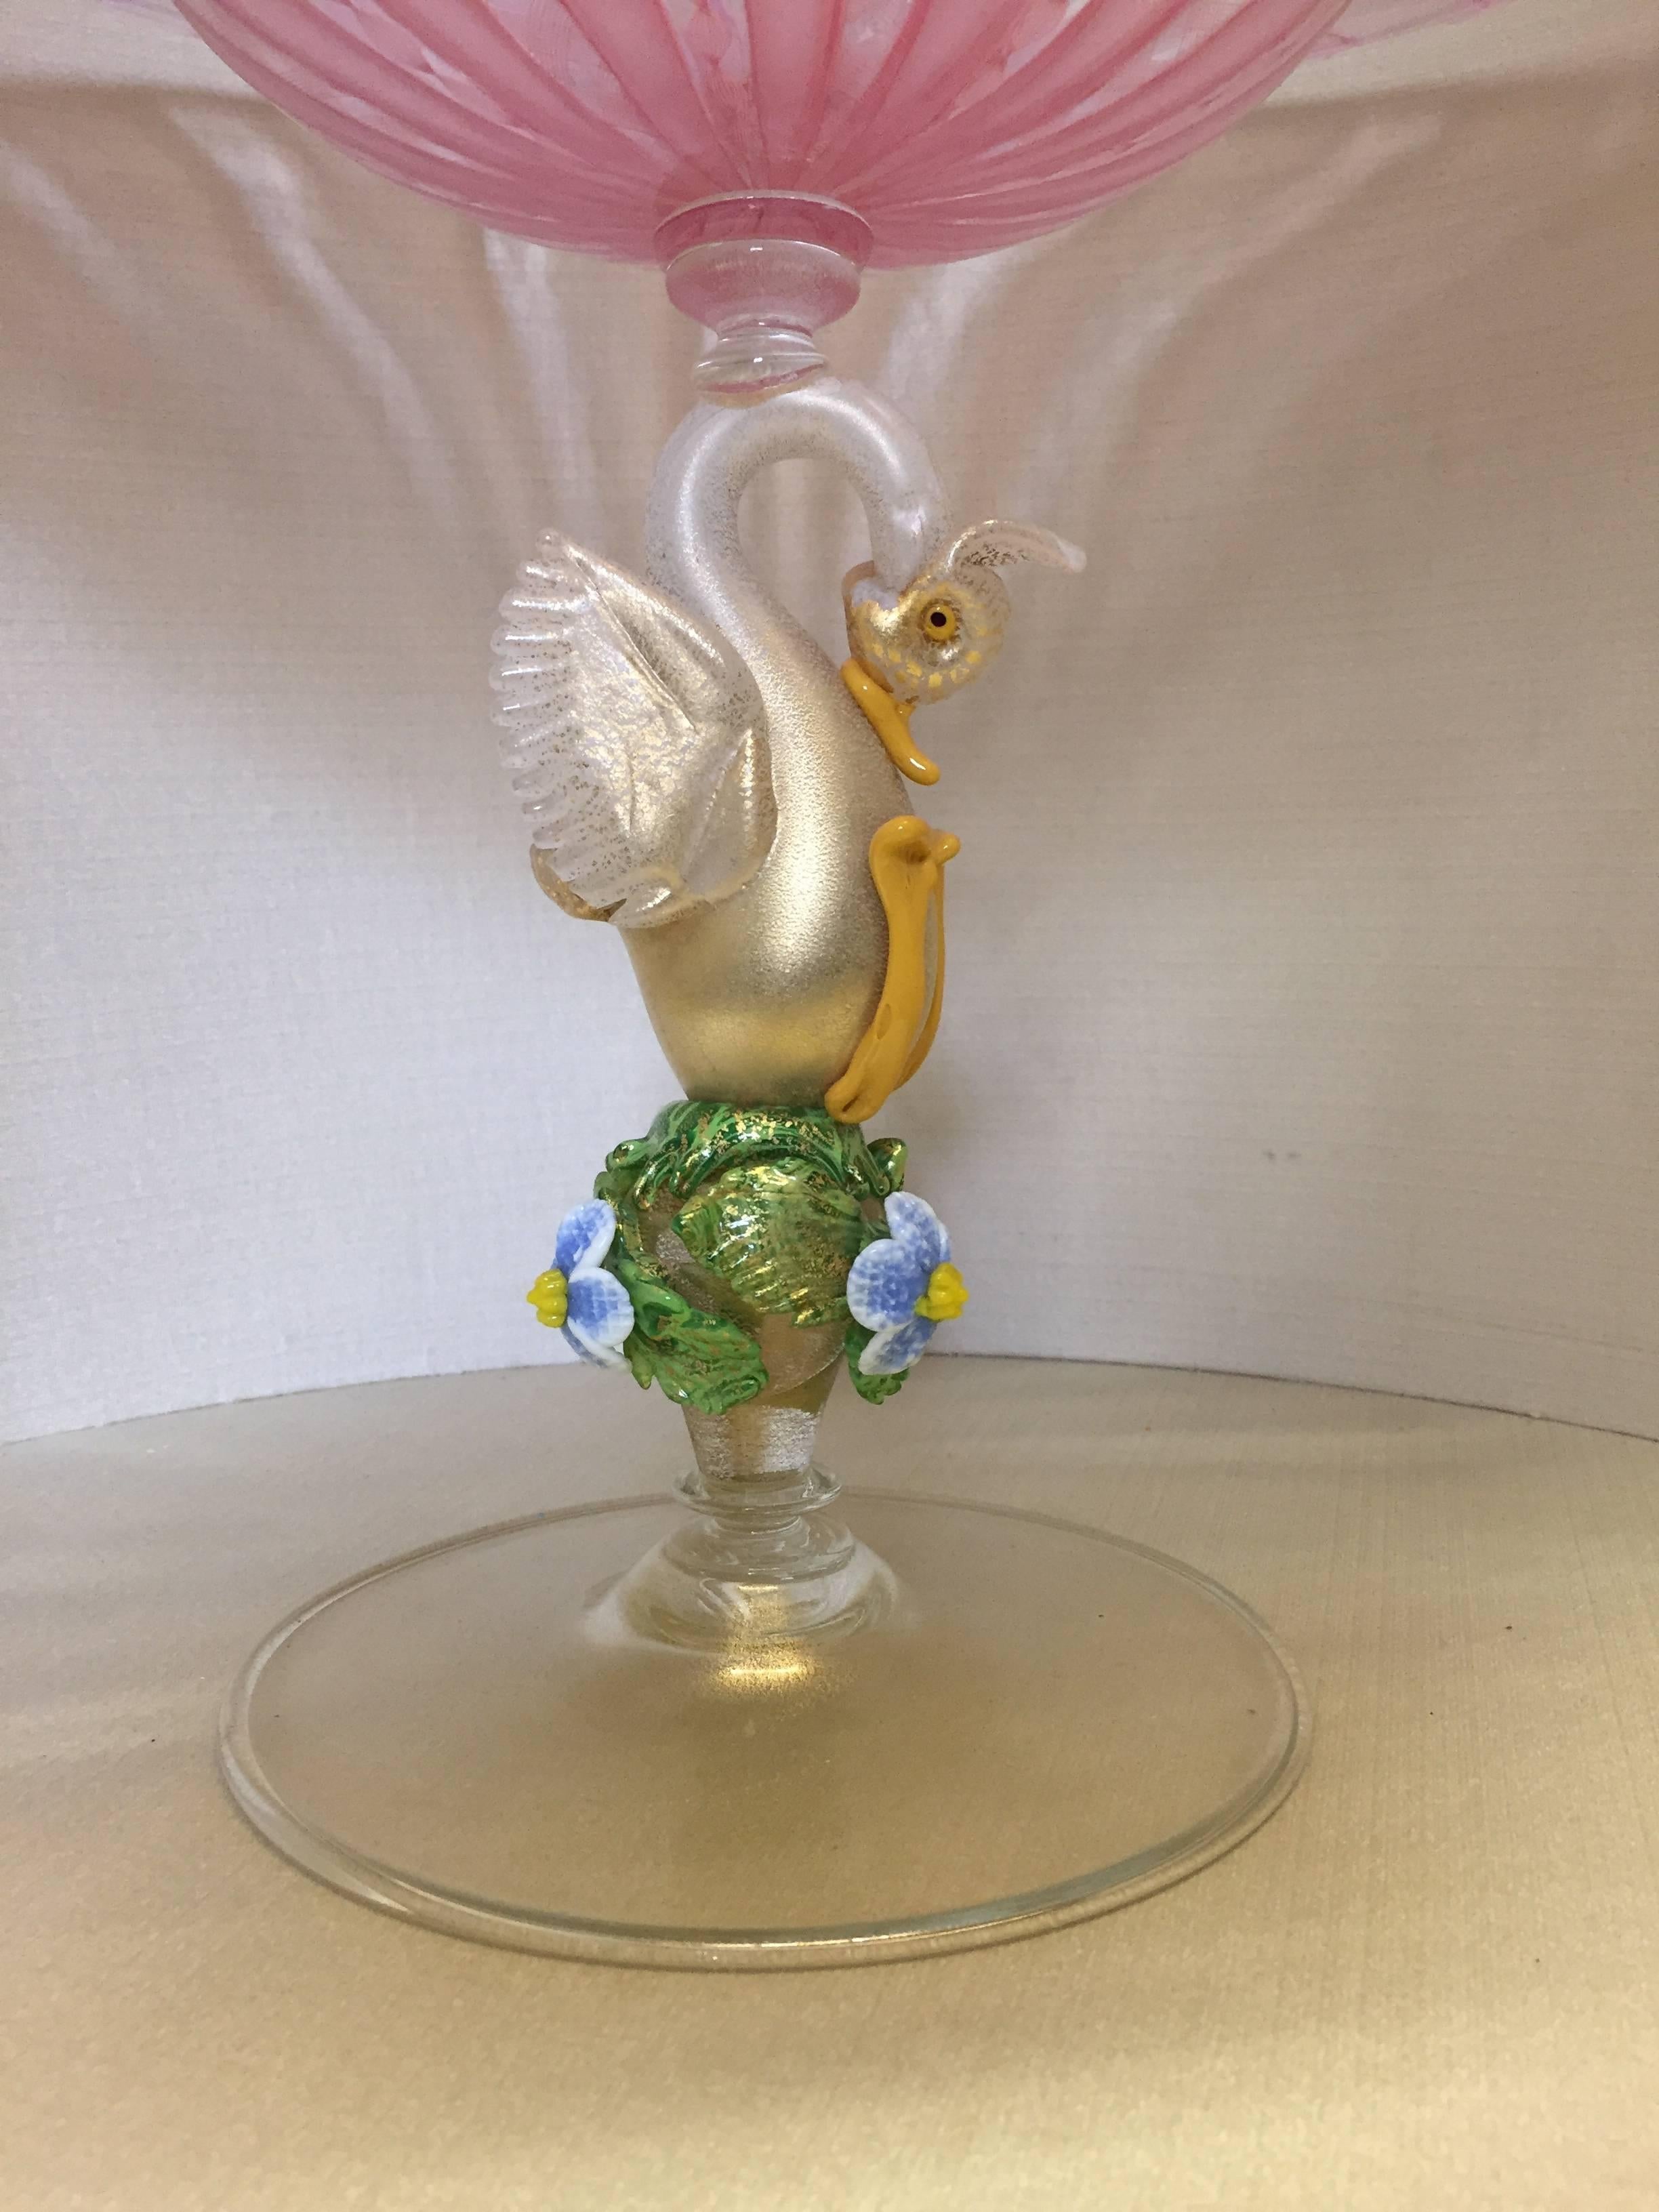 Amazing centerpiece with zanfirico glass bowl sits on an opal glass swan with 24-karat gold leaf, flowers and leaves make precious the stem, made by G. Seguso.